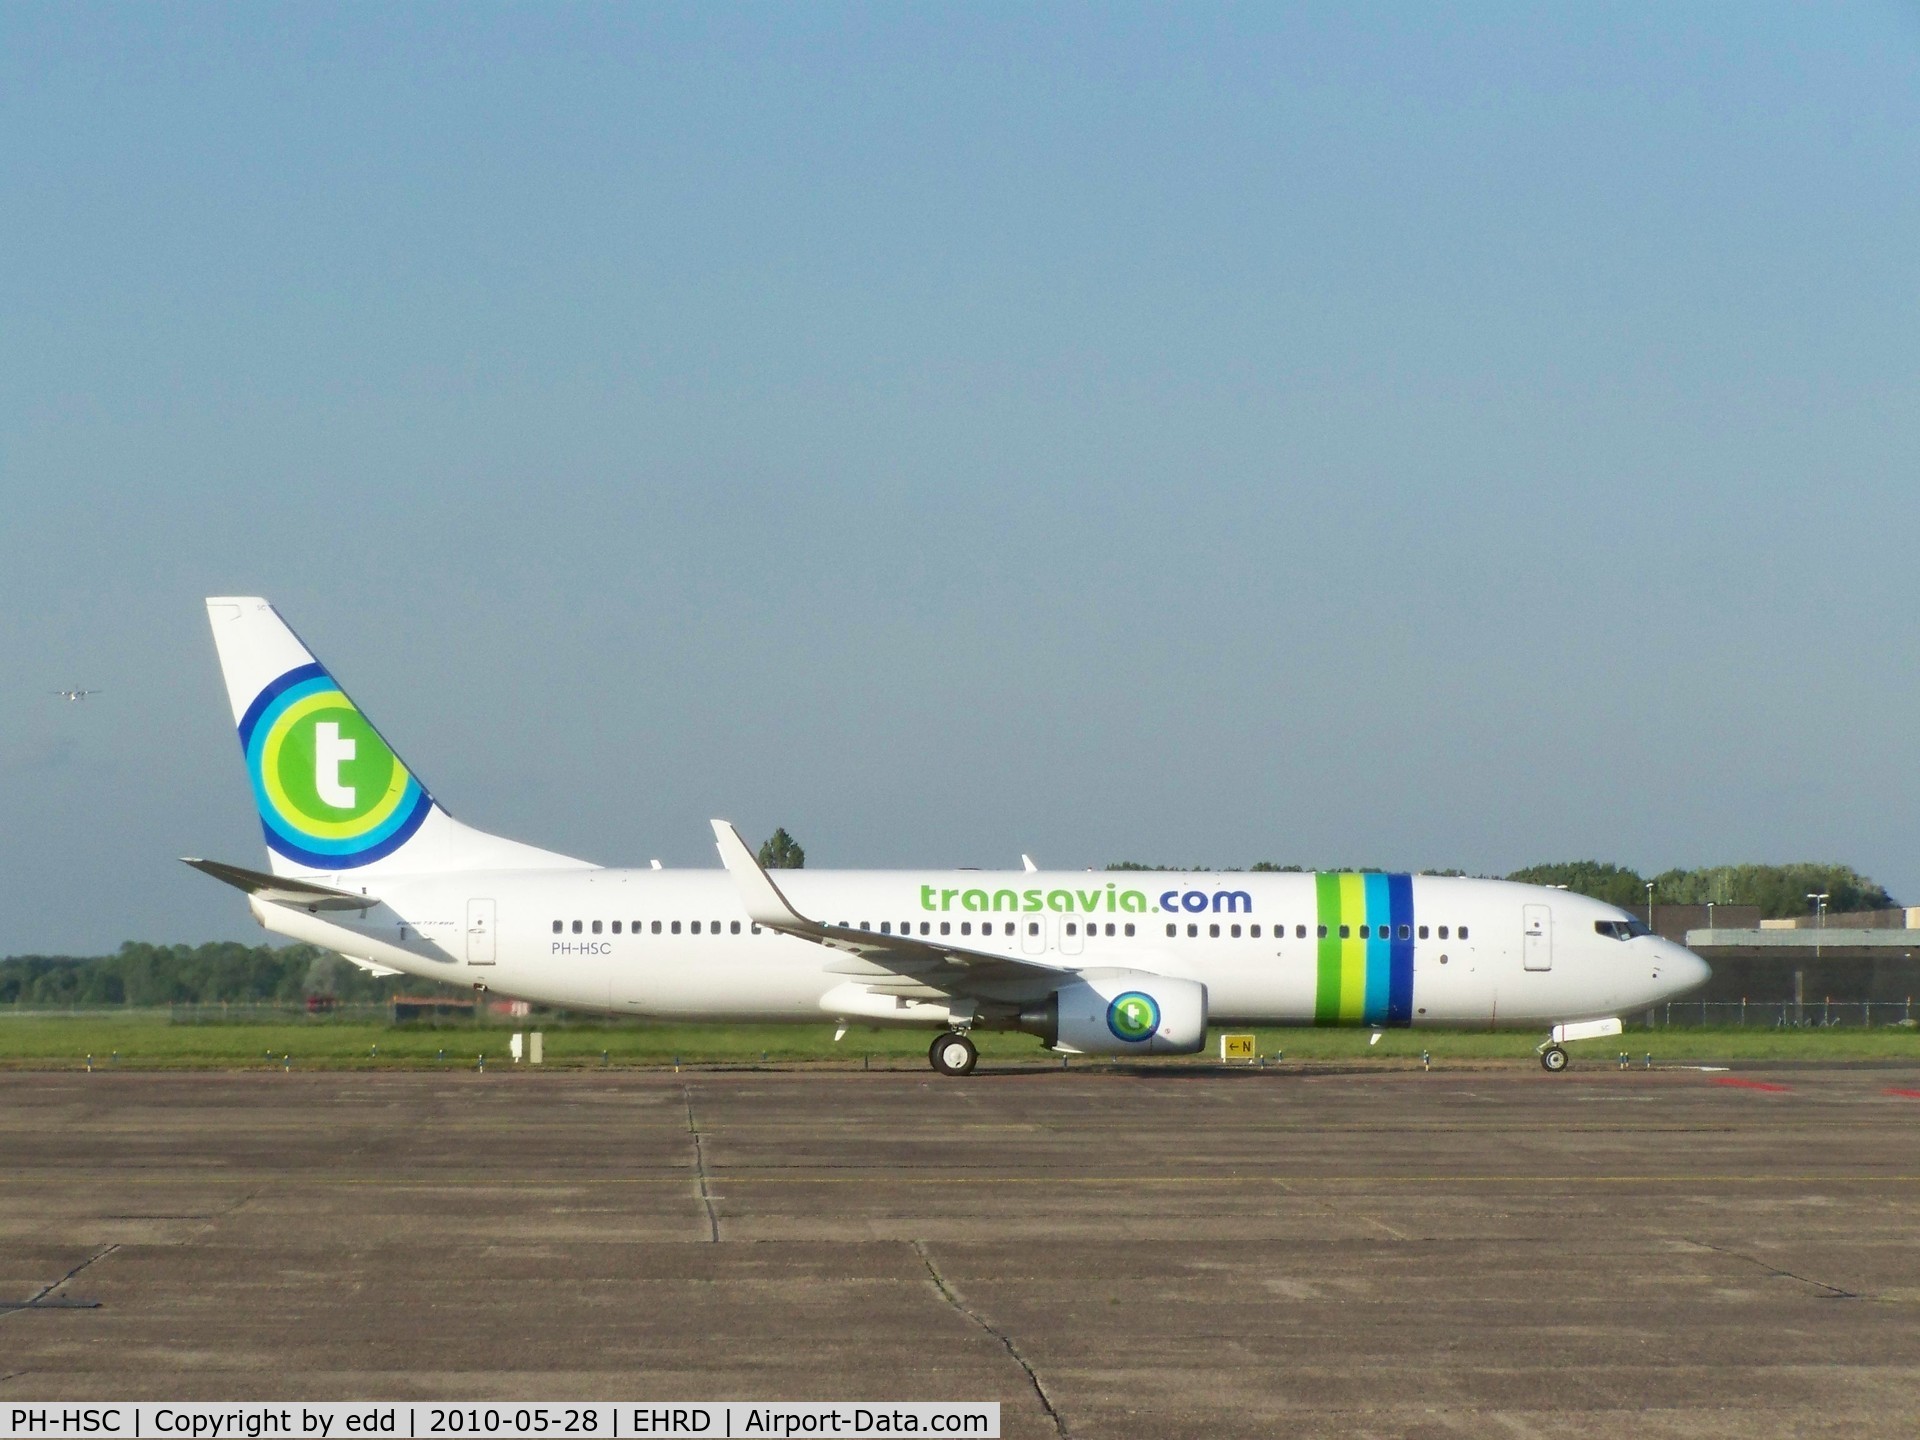 PH-HSC, 2010 Boeing 737-8K2 C/N 34173, THE LATEST BOEING FOR TRANSAVIA DELIVERY DAY WAS 2010-05-05